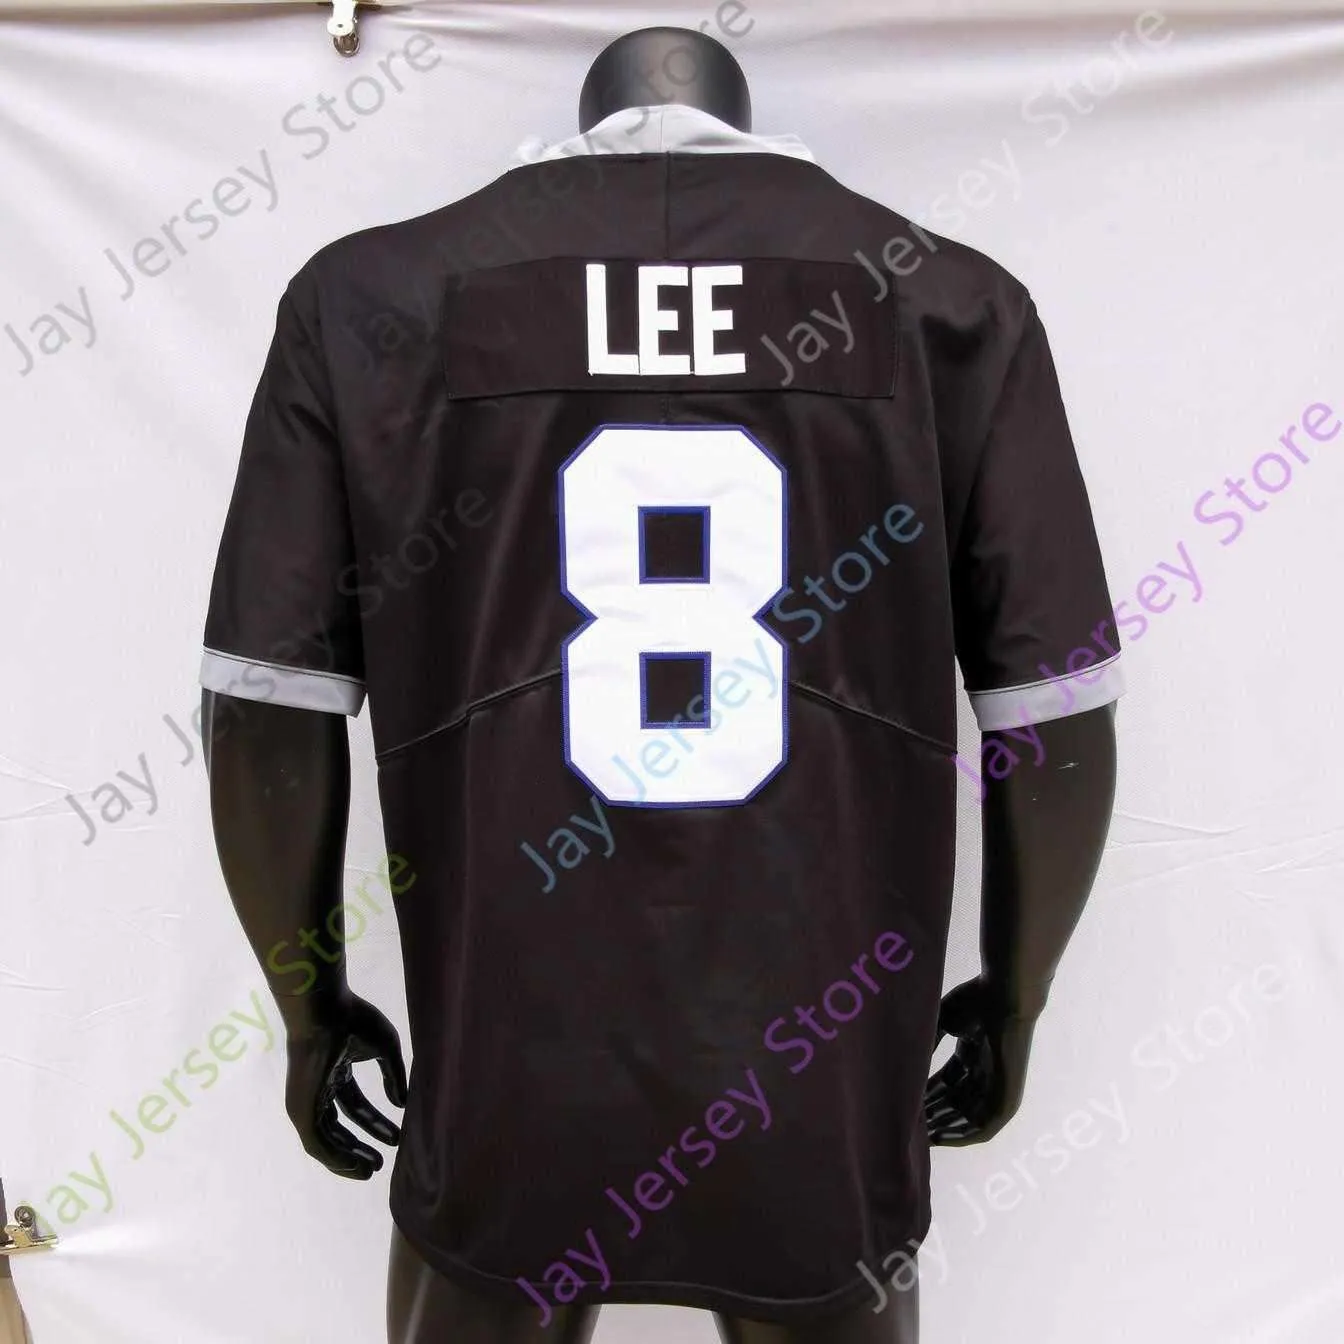 2020 New NCAA Middle Tennessee State Jerseys 8  Lee College Football Jersey Black Size Youth Adult All Stitched